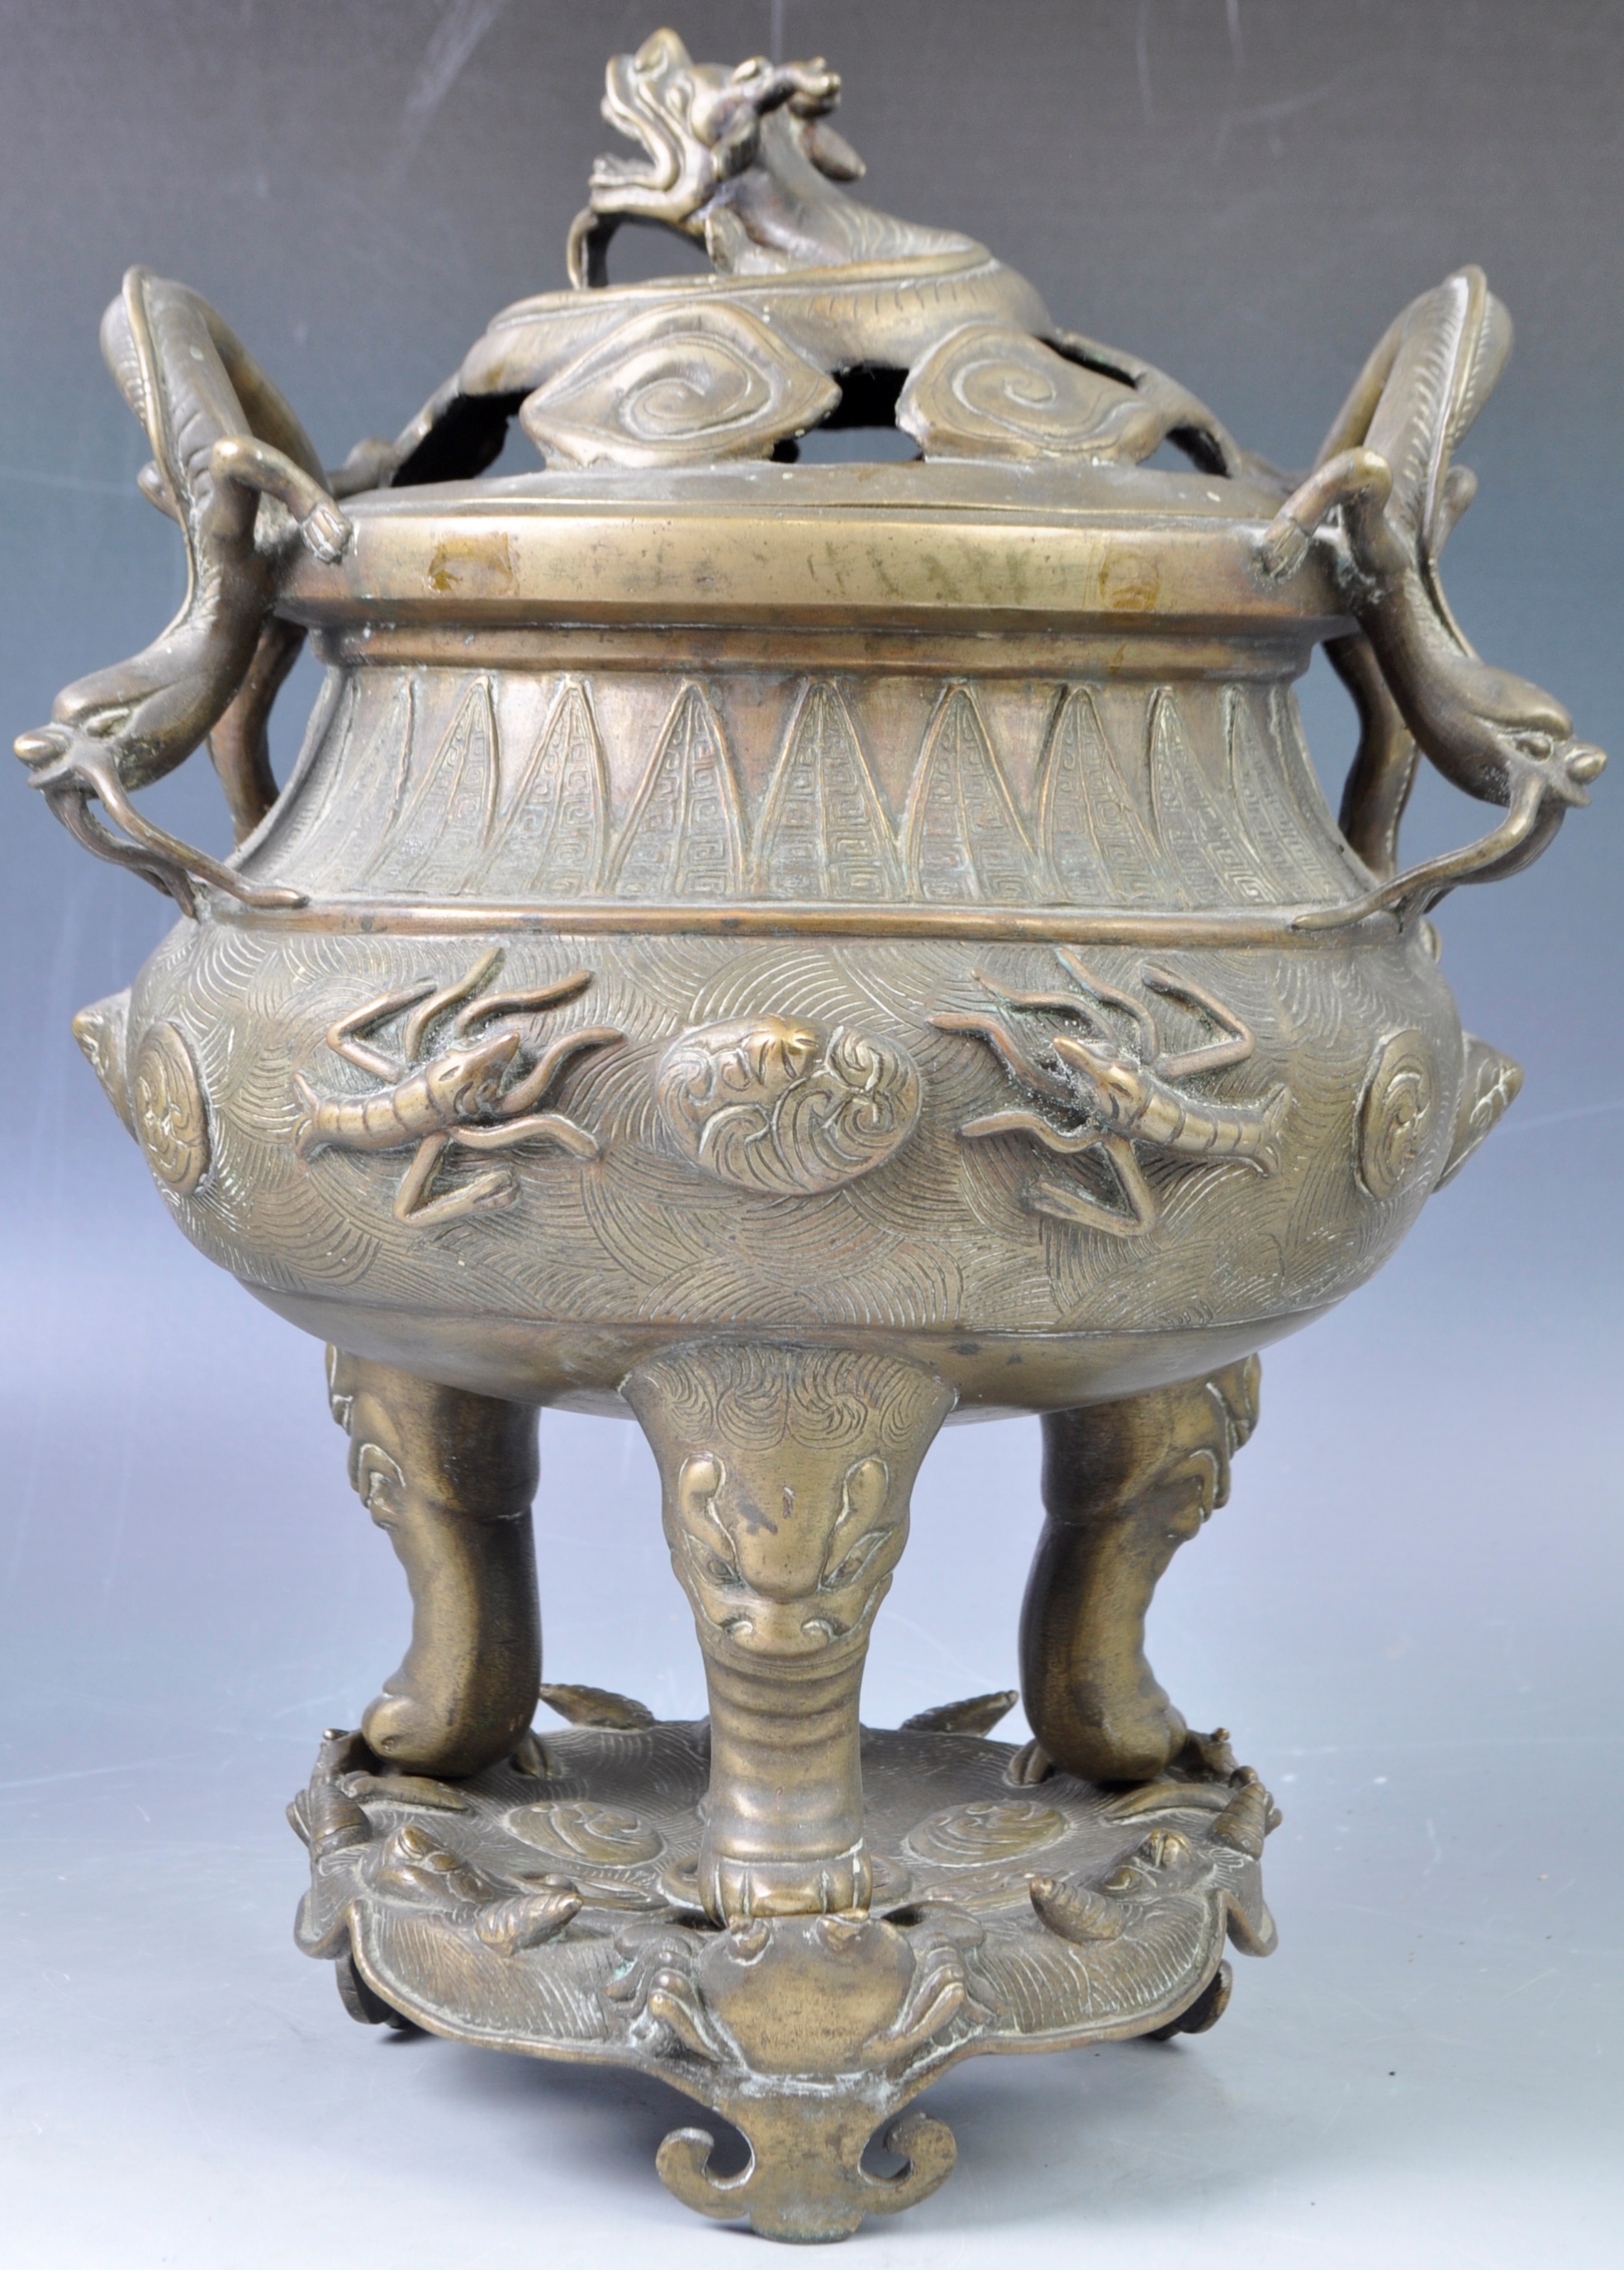 RARE 19TH CENTURY CHINESE BRONZE CENSER WITH PROVENANCE - Image 2 of 6